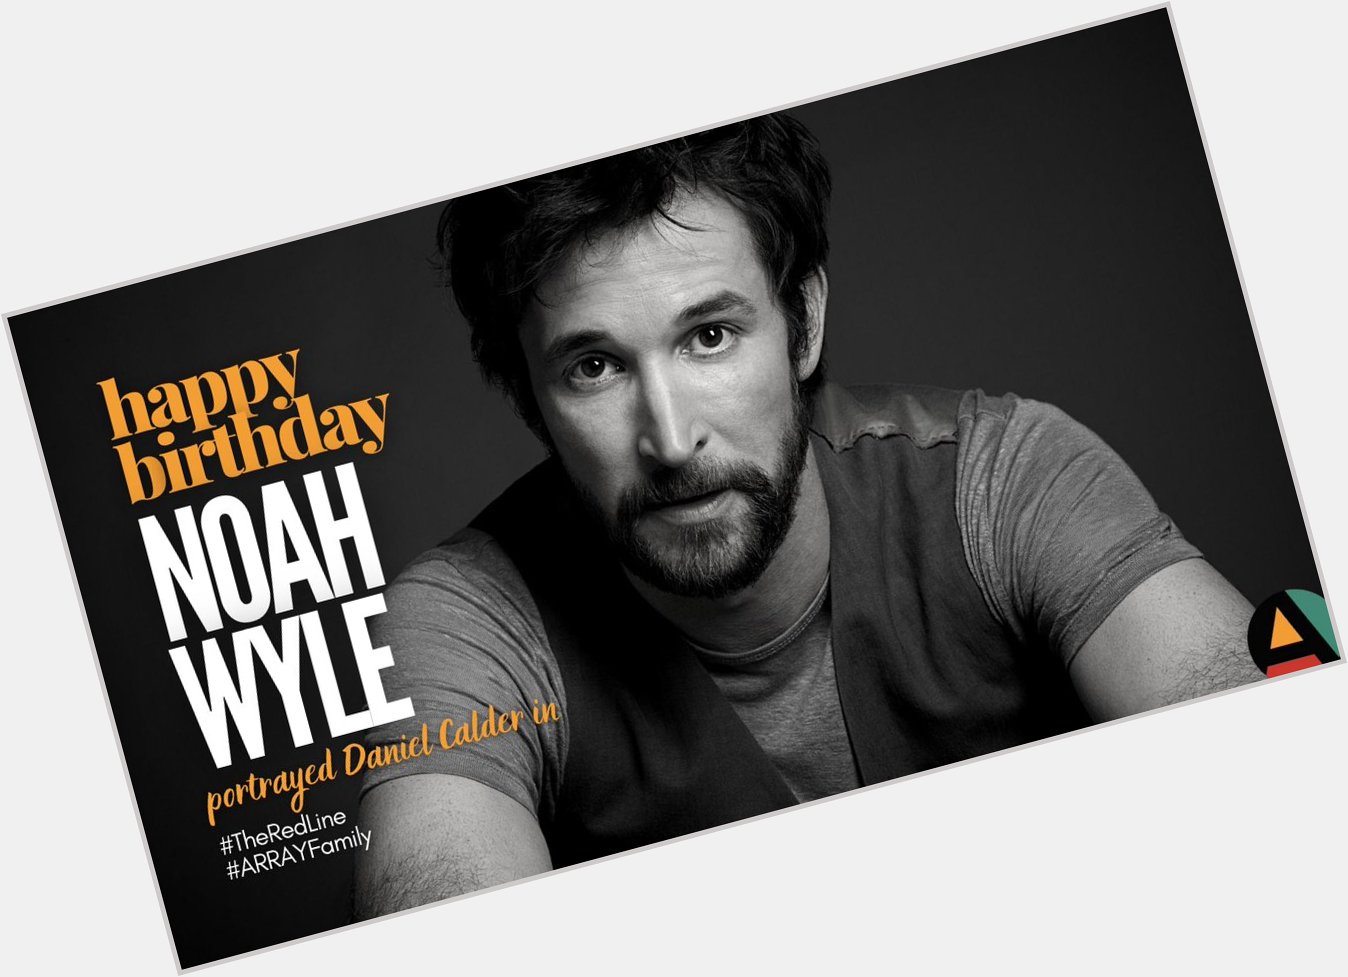 Happy Birthday to Noah Wyle! Have a great day of celebration! 